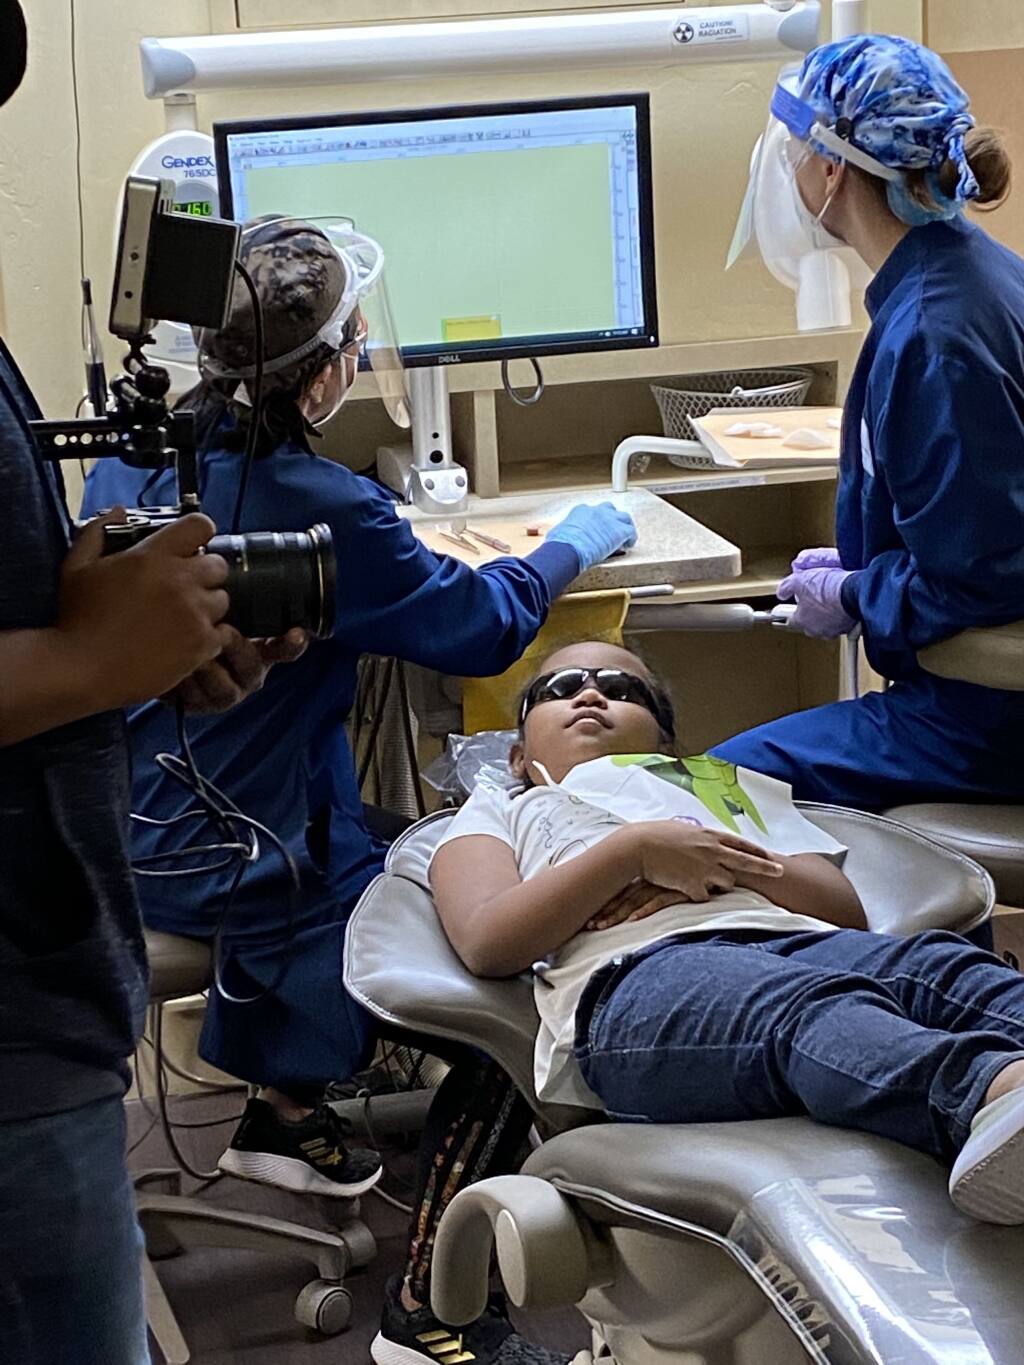 The California Dental Association last month launched its Smile Crew California campaign, which promotes careers in dentistry. (courtesy photo)